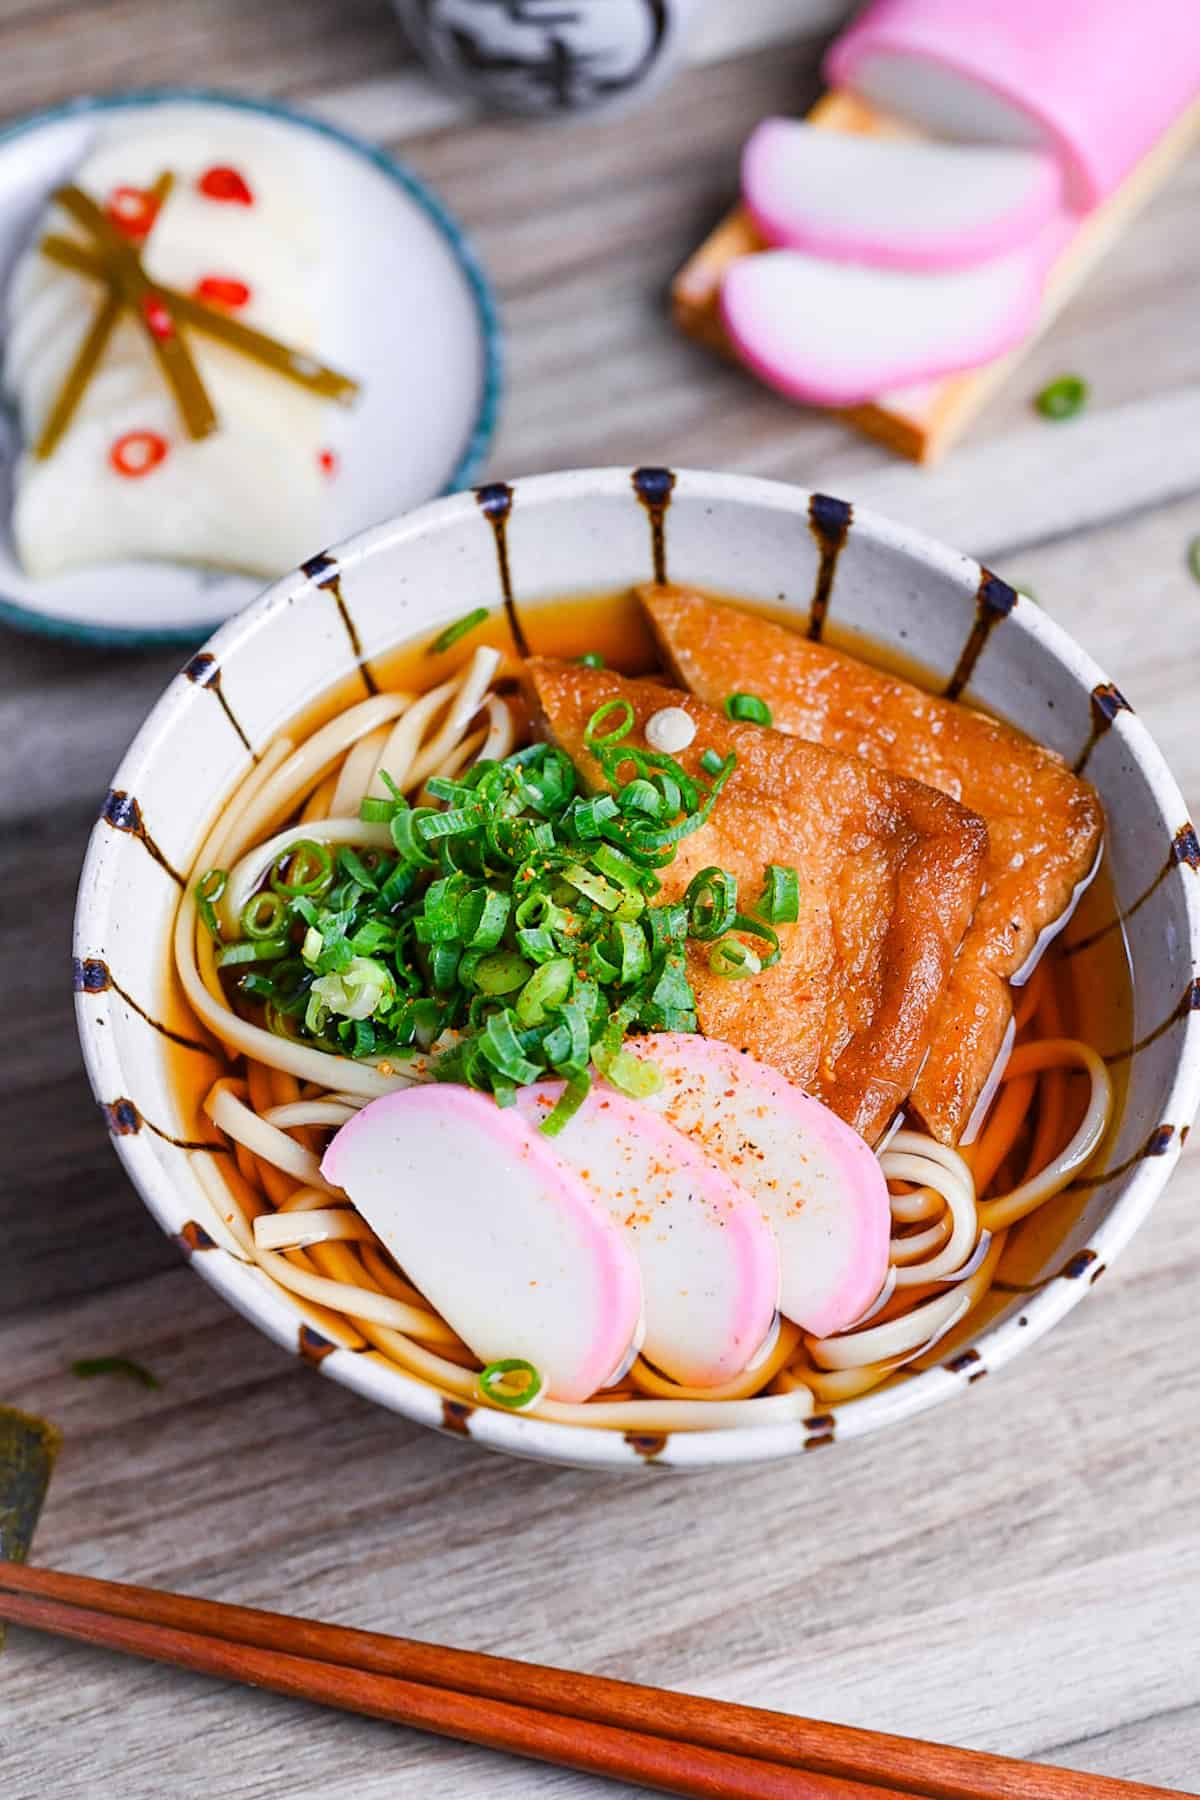 Kitsune Udon made with udon noodles in a dashi soup topped with fried tofu pouches, pink and white fish cakes (kamaboko) and chopped green onions in a beige bowl with brown stripes